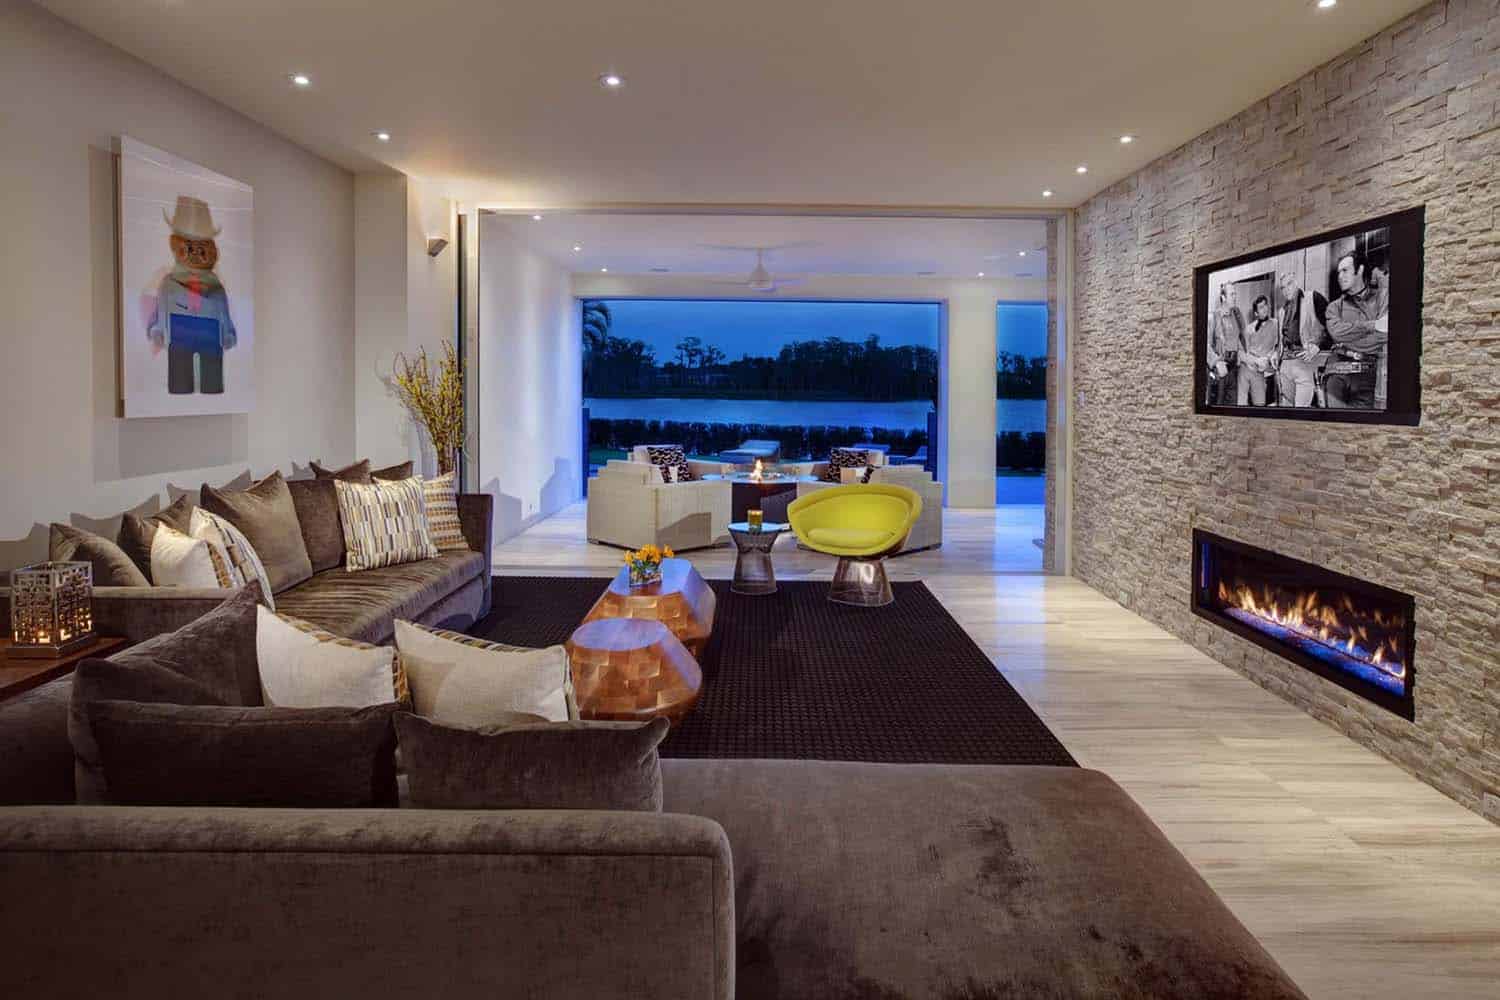 LEED Gold Florida home encourages indoor/outdoor lifestyle